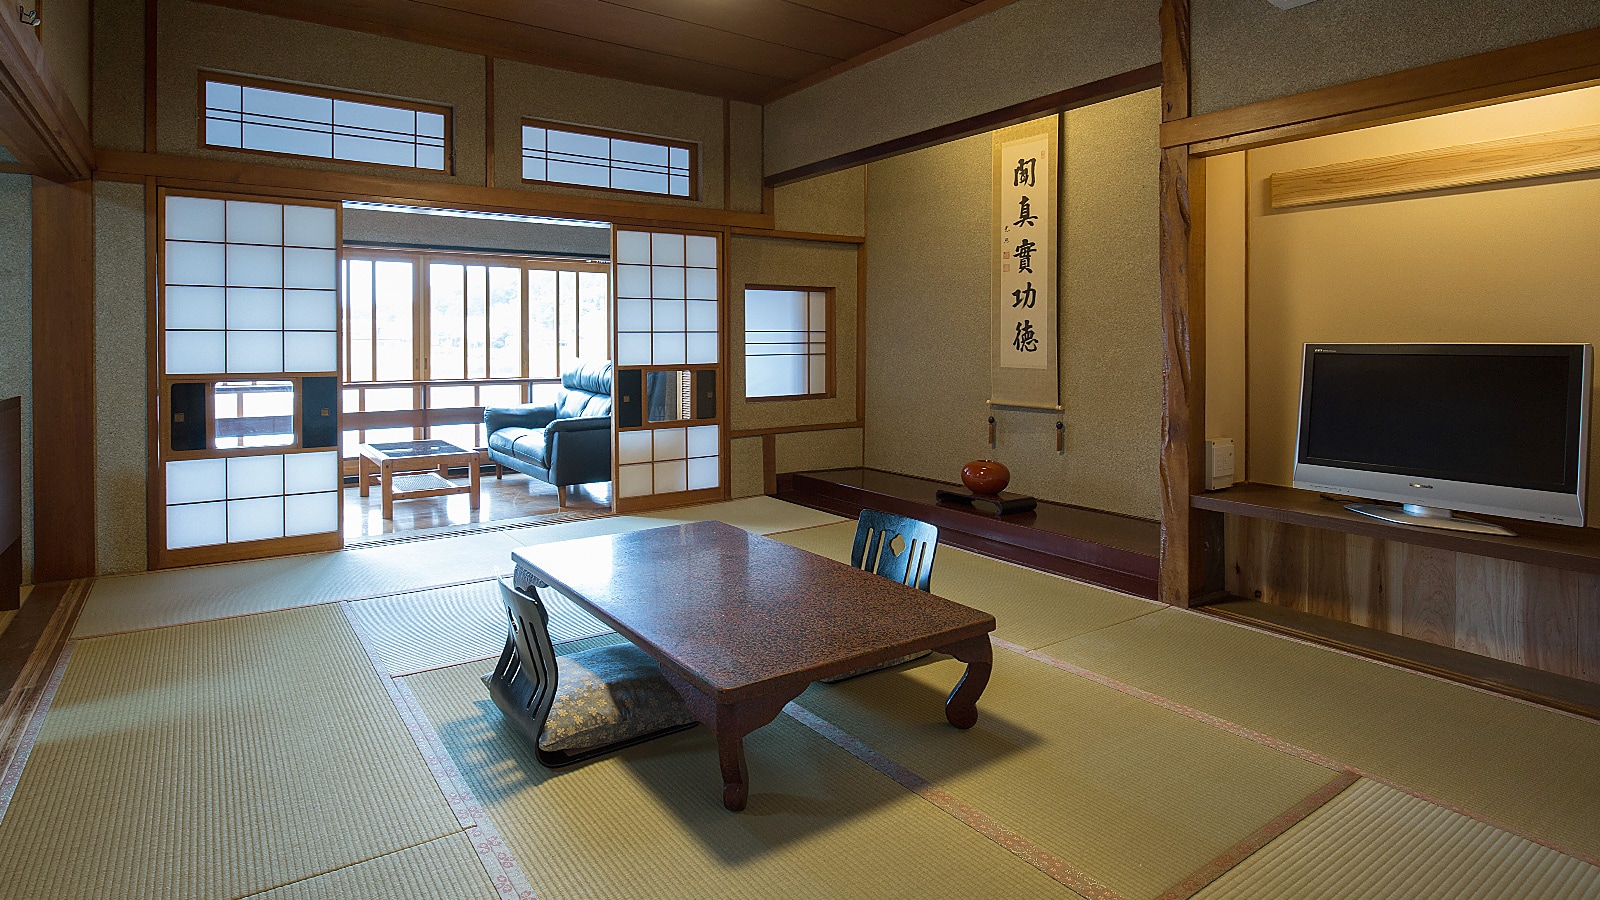 A Japanese-style room built in a sukiya style where you can fully enjoy the atmosphere of the ancient city.